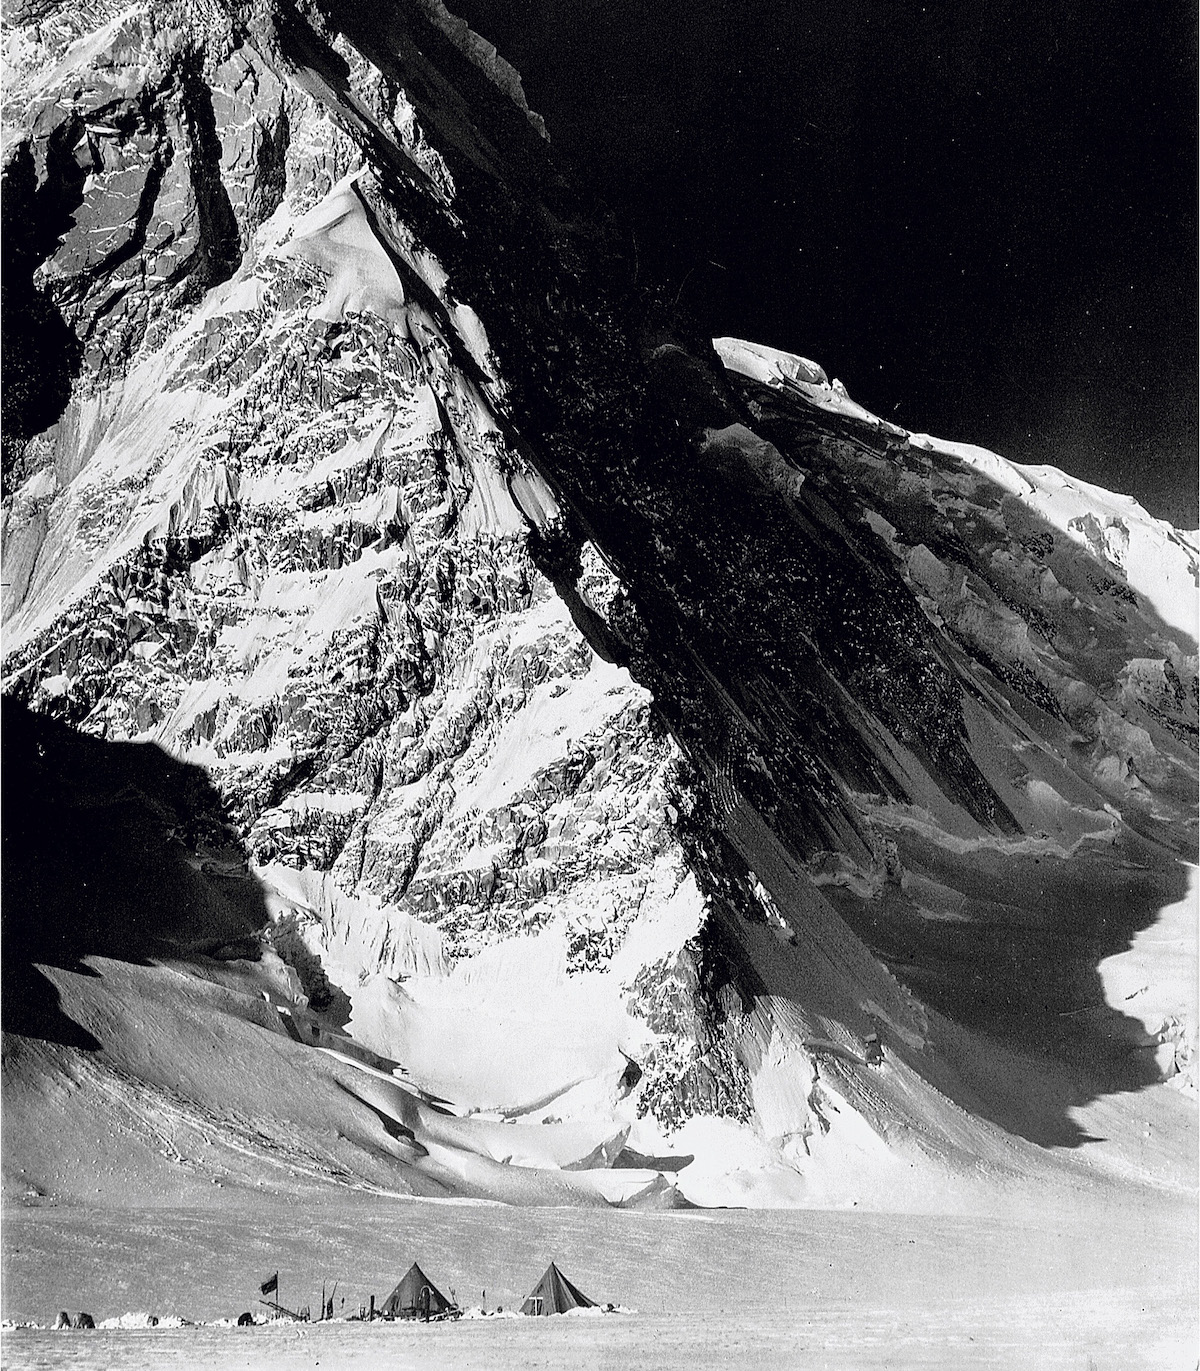 The north buttress of Mt. Kennedy as seen during the 1935 National Geographic Society Yukon Expedition. At the time, Bob Bates wrote that he hoped the peak would be called Mt. Washburn. It was known as East Hubbard until it was renamed for President Kennedy in 1965. In his years as director of the Boston Museum of Science, Washburn hung an enlarged version of this photograph on his office wall. [Photo] Bradford Washburn, Bradford Washburn collection, Museum of Science